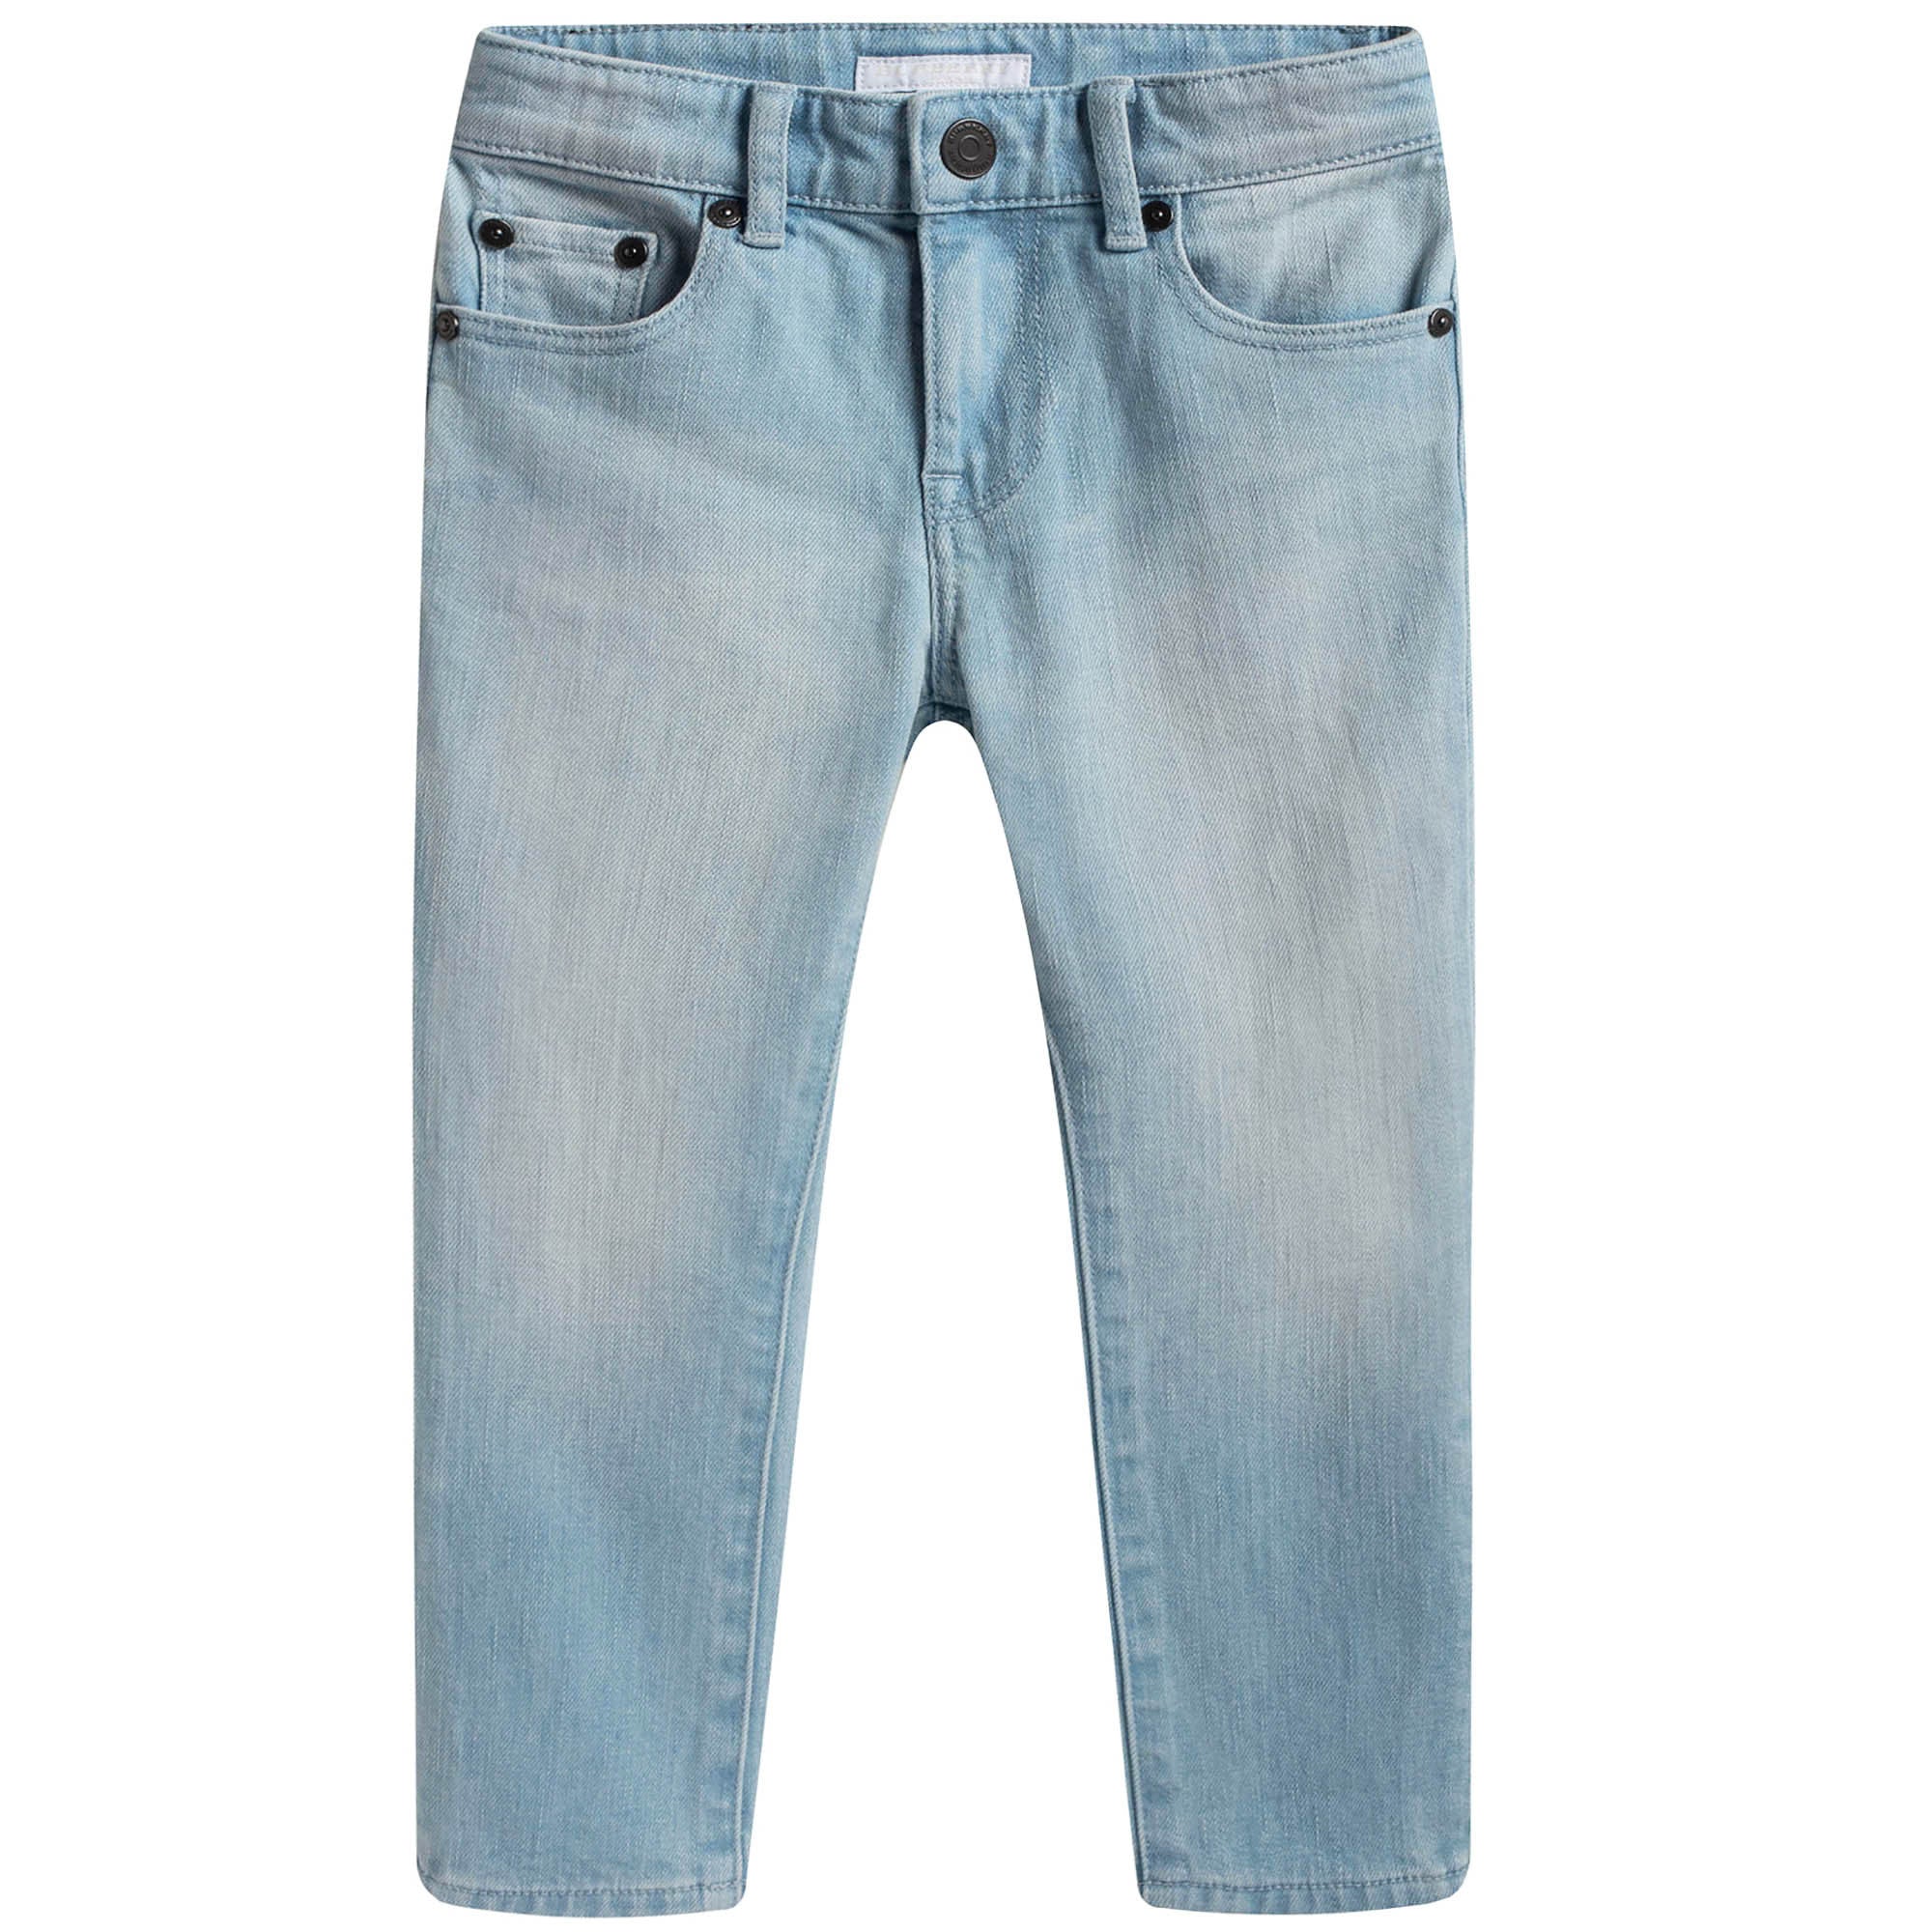 Boys Blue Denim Relaxed Slim Fit Jeans